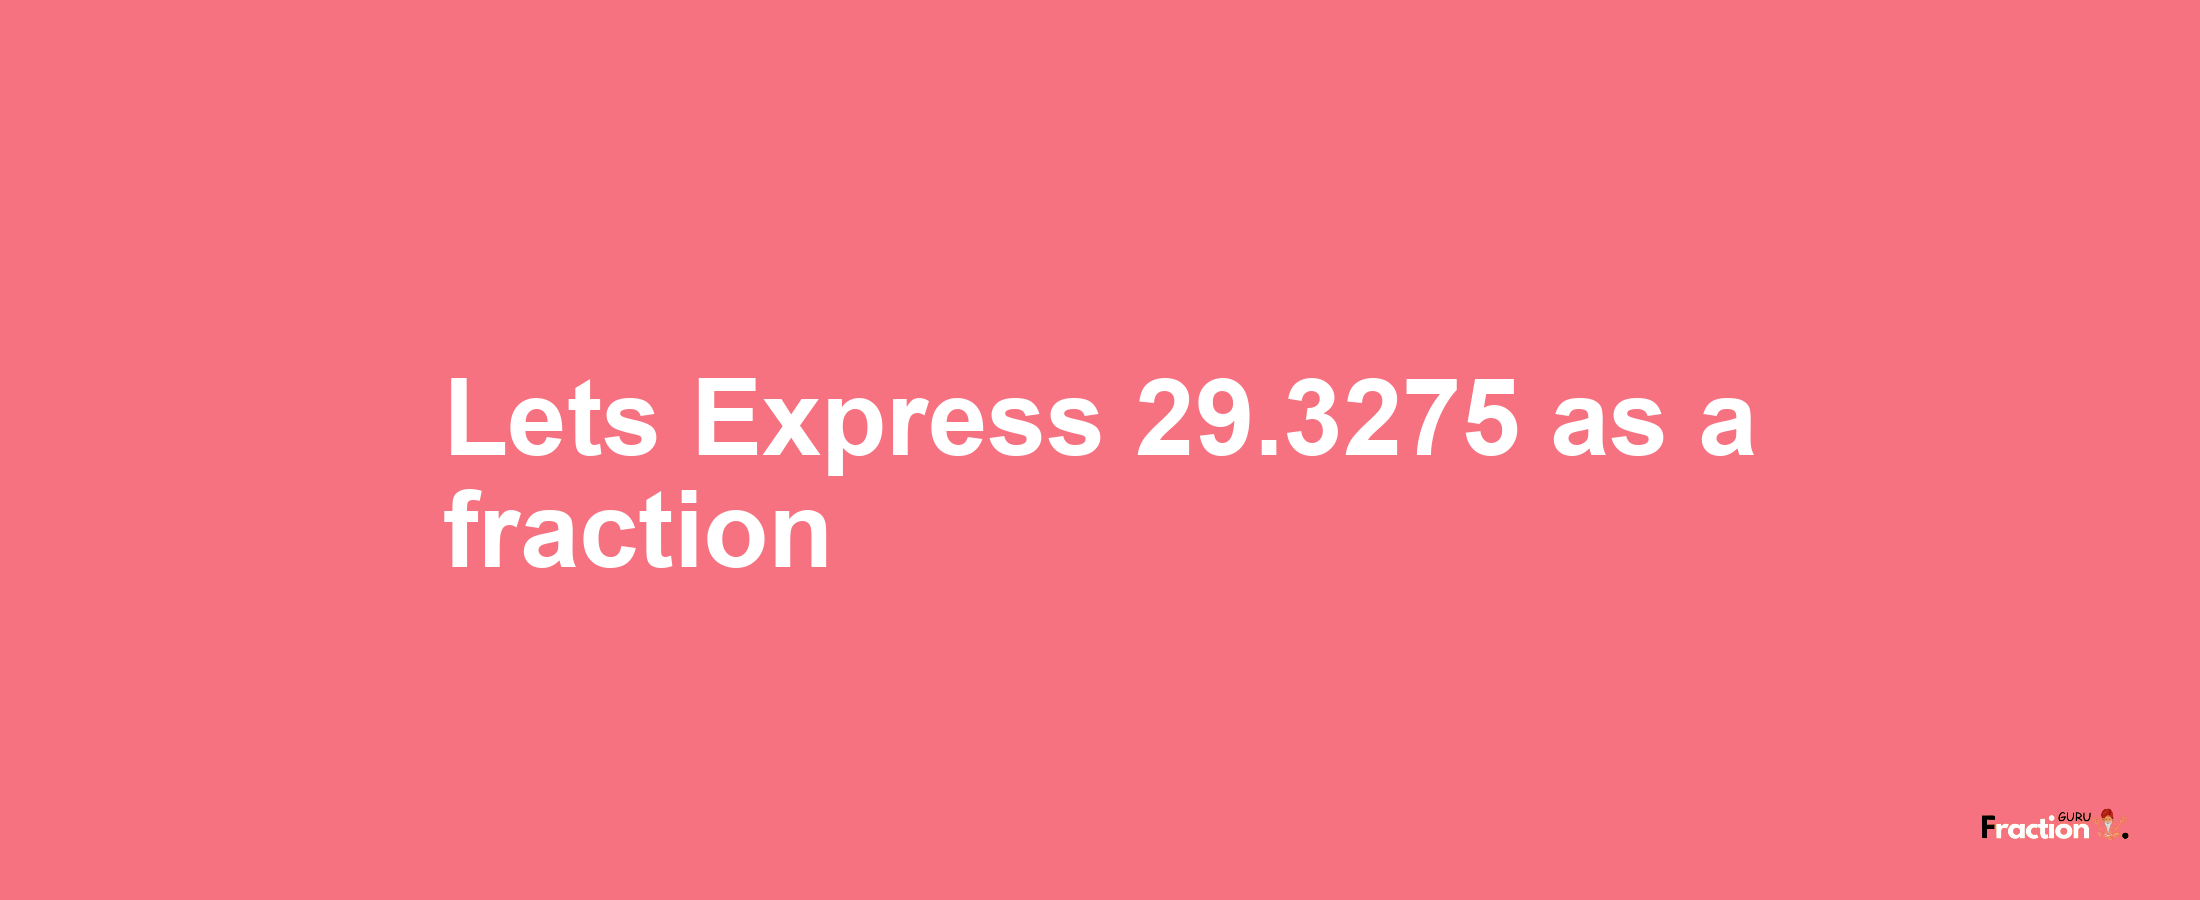 Lets Express 29.3275 as afraction